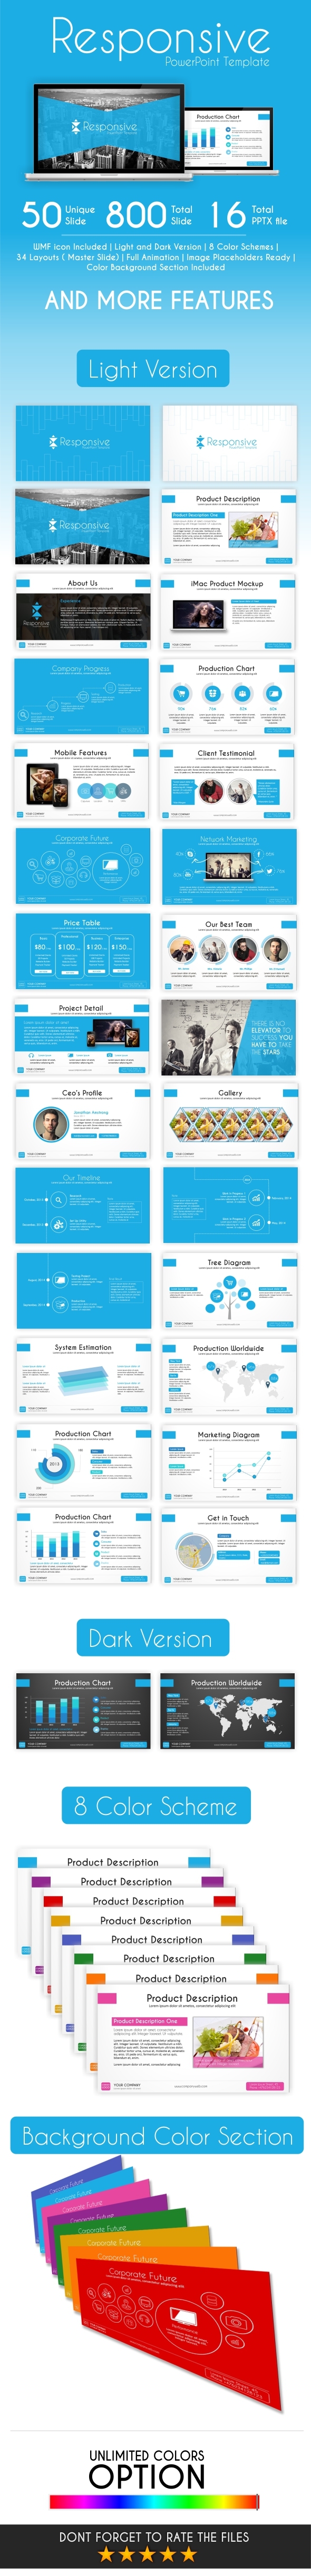 Responsive PowerPoint Template